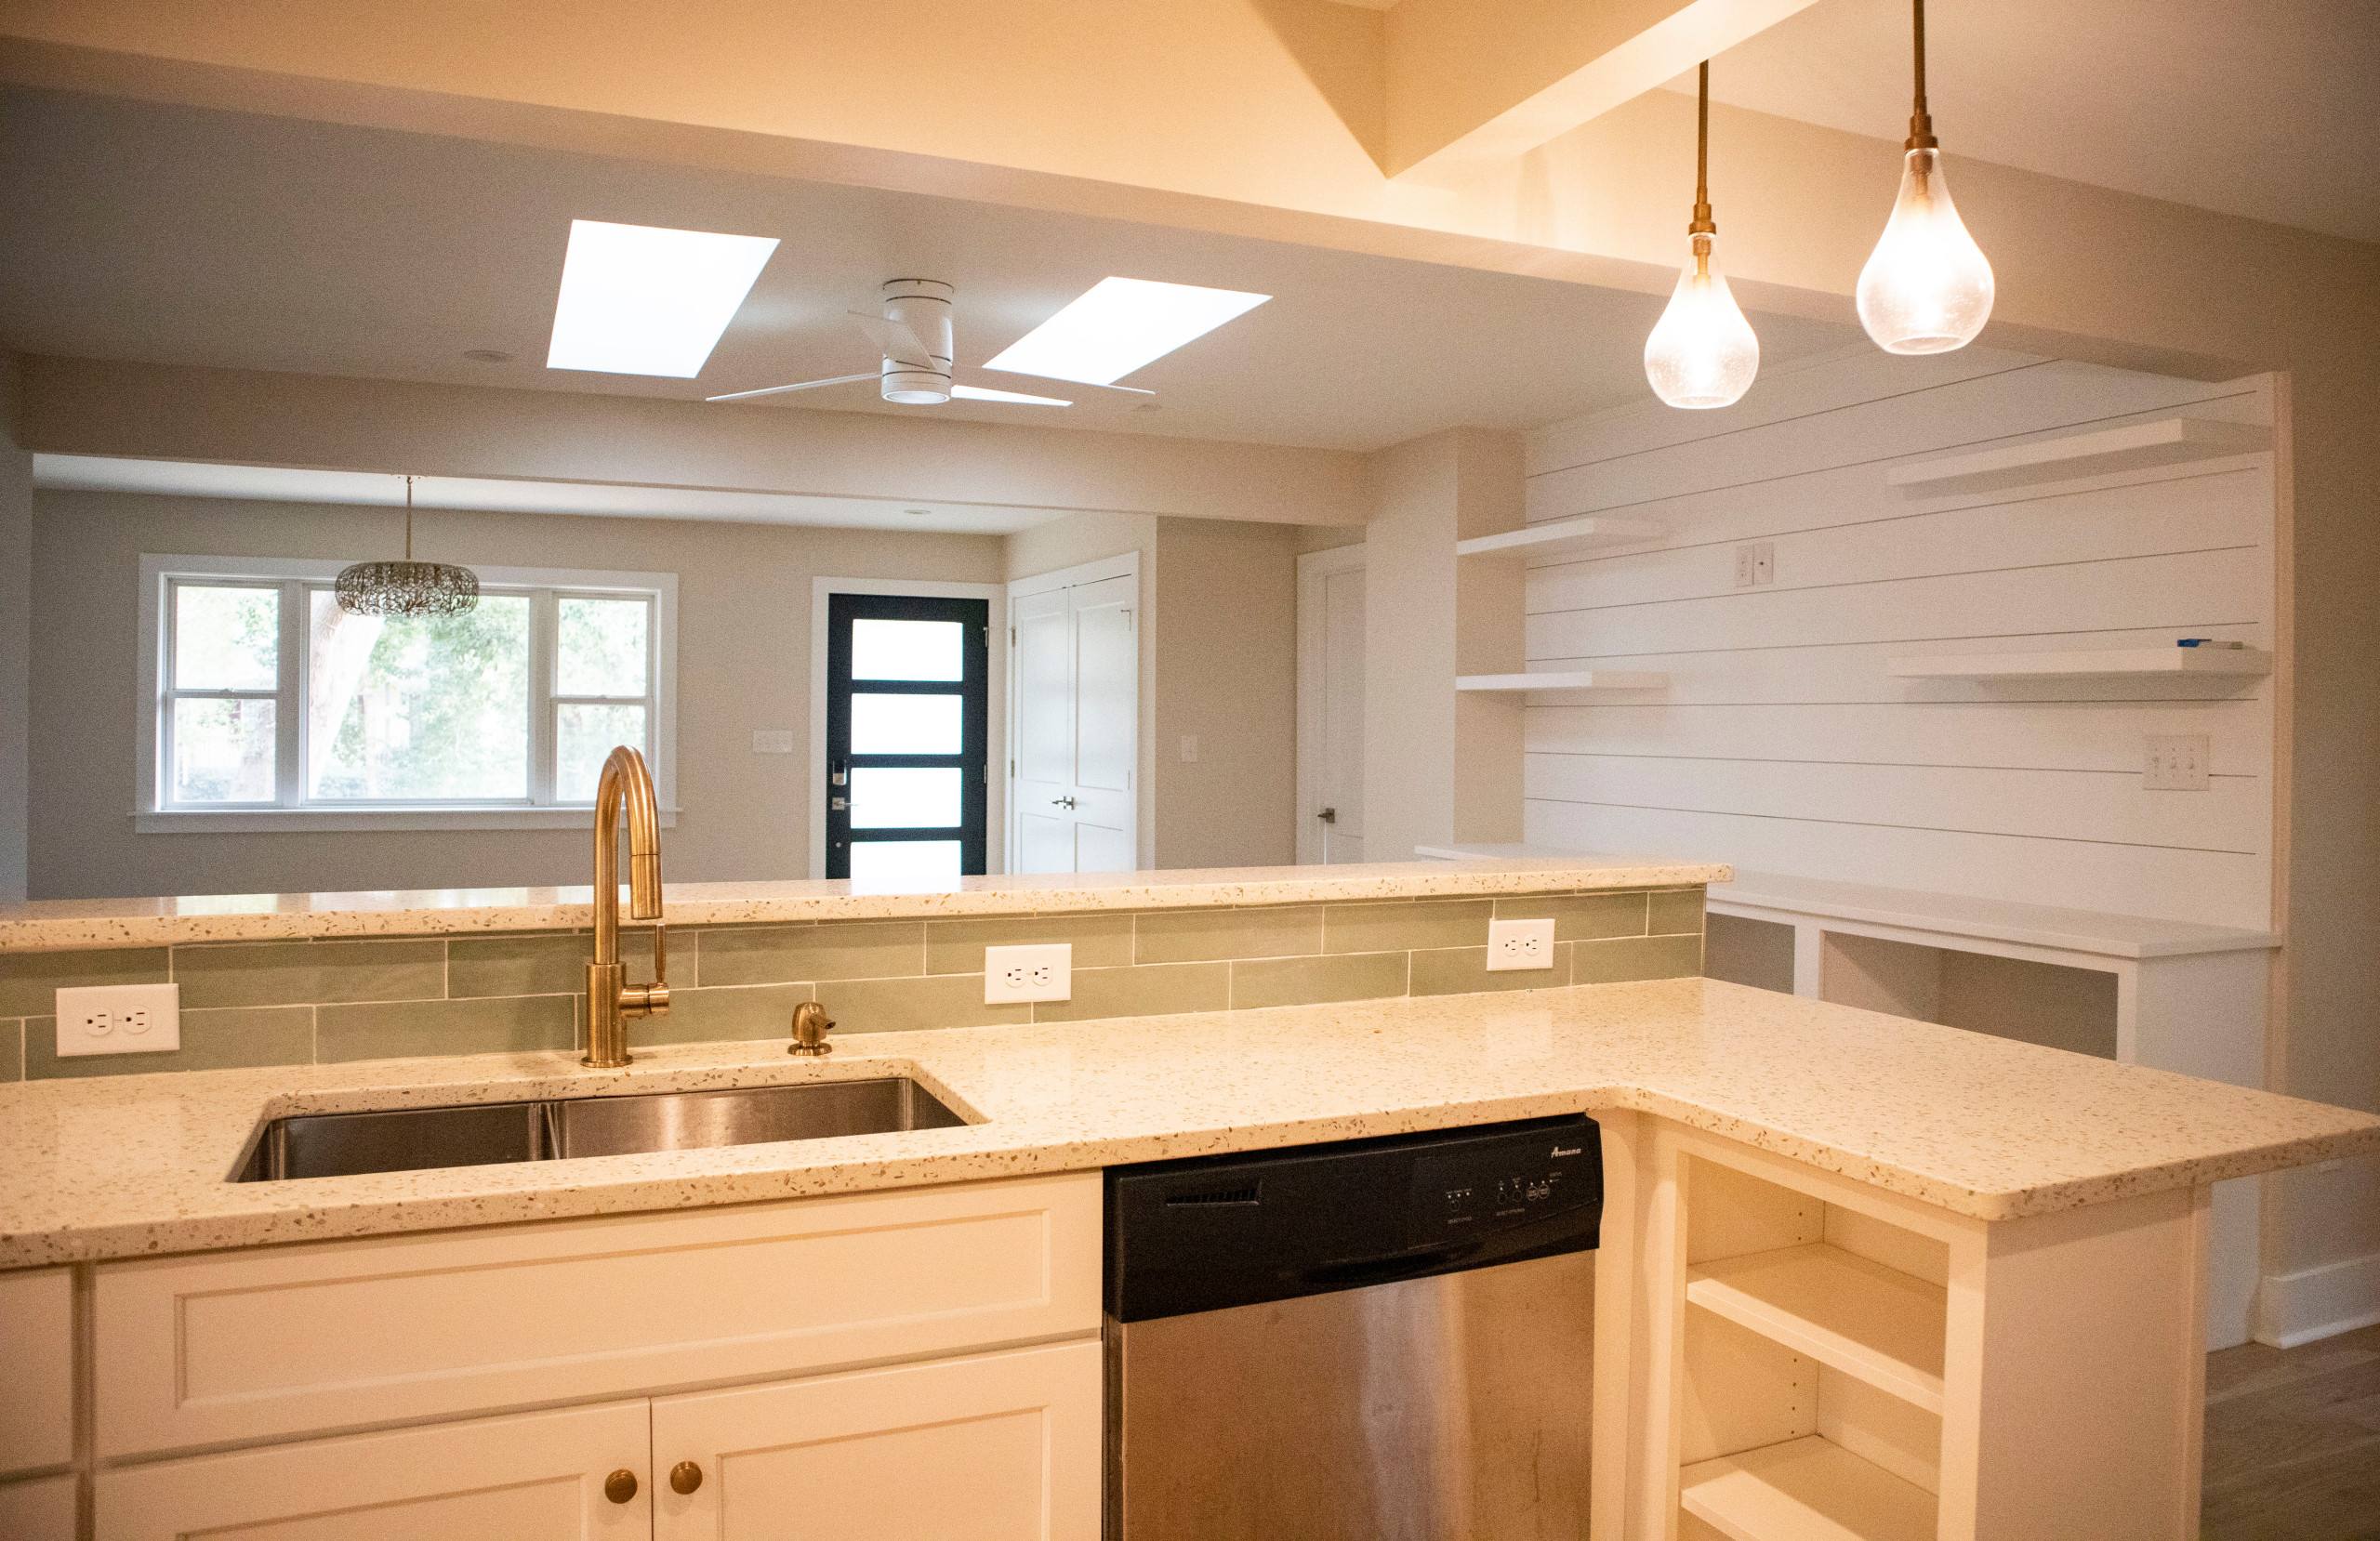 Pine Knoll Shores Remodel